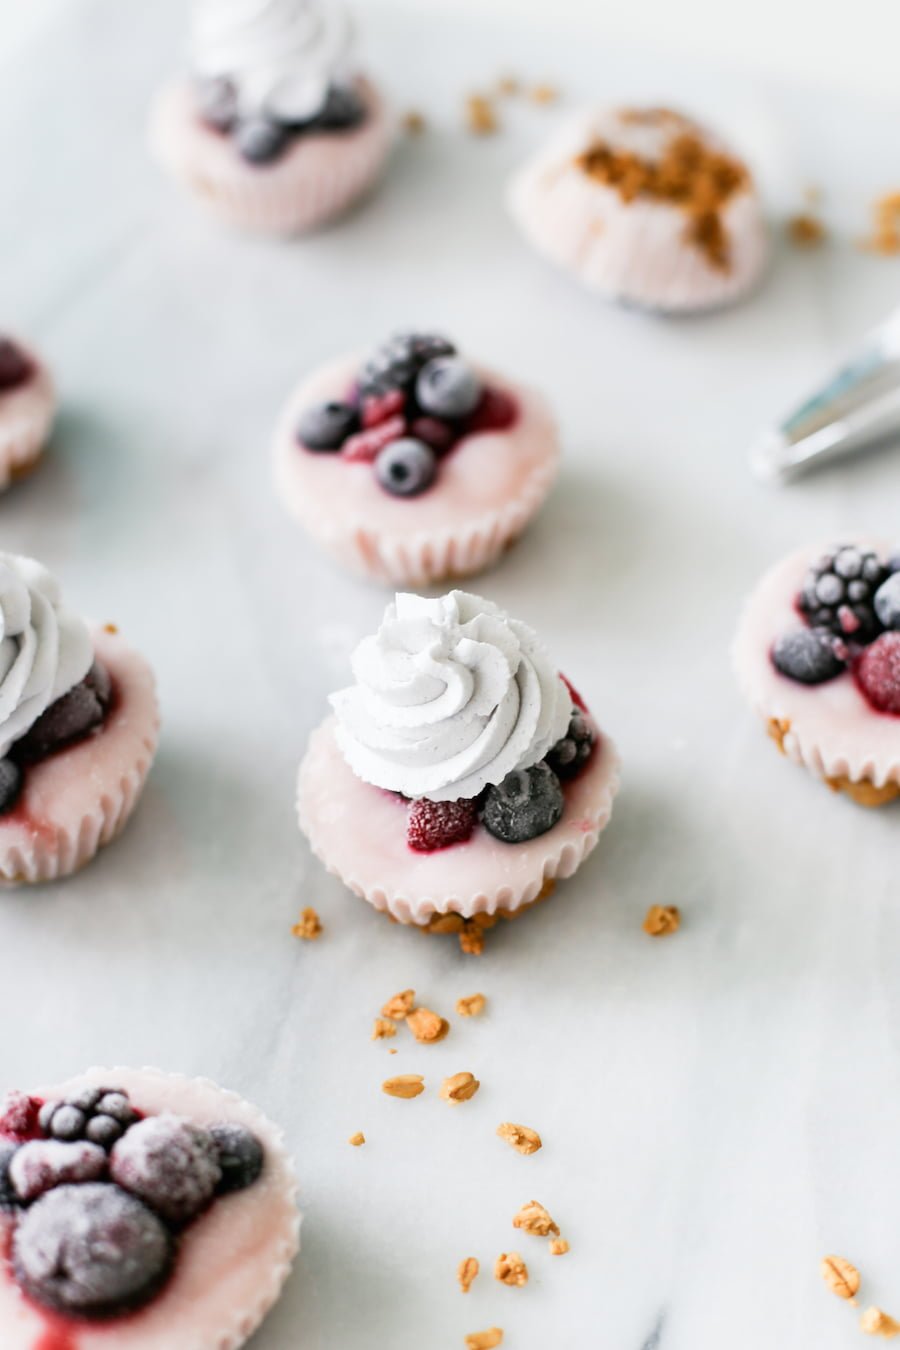 Since they're made in a cupcake pan, that makes them cupcakes right? No frosting, but add some blueberry whipped cream on top of these Yogurt Parfait Cupcakes! | saltycanary.com